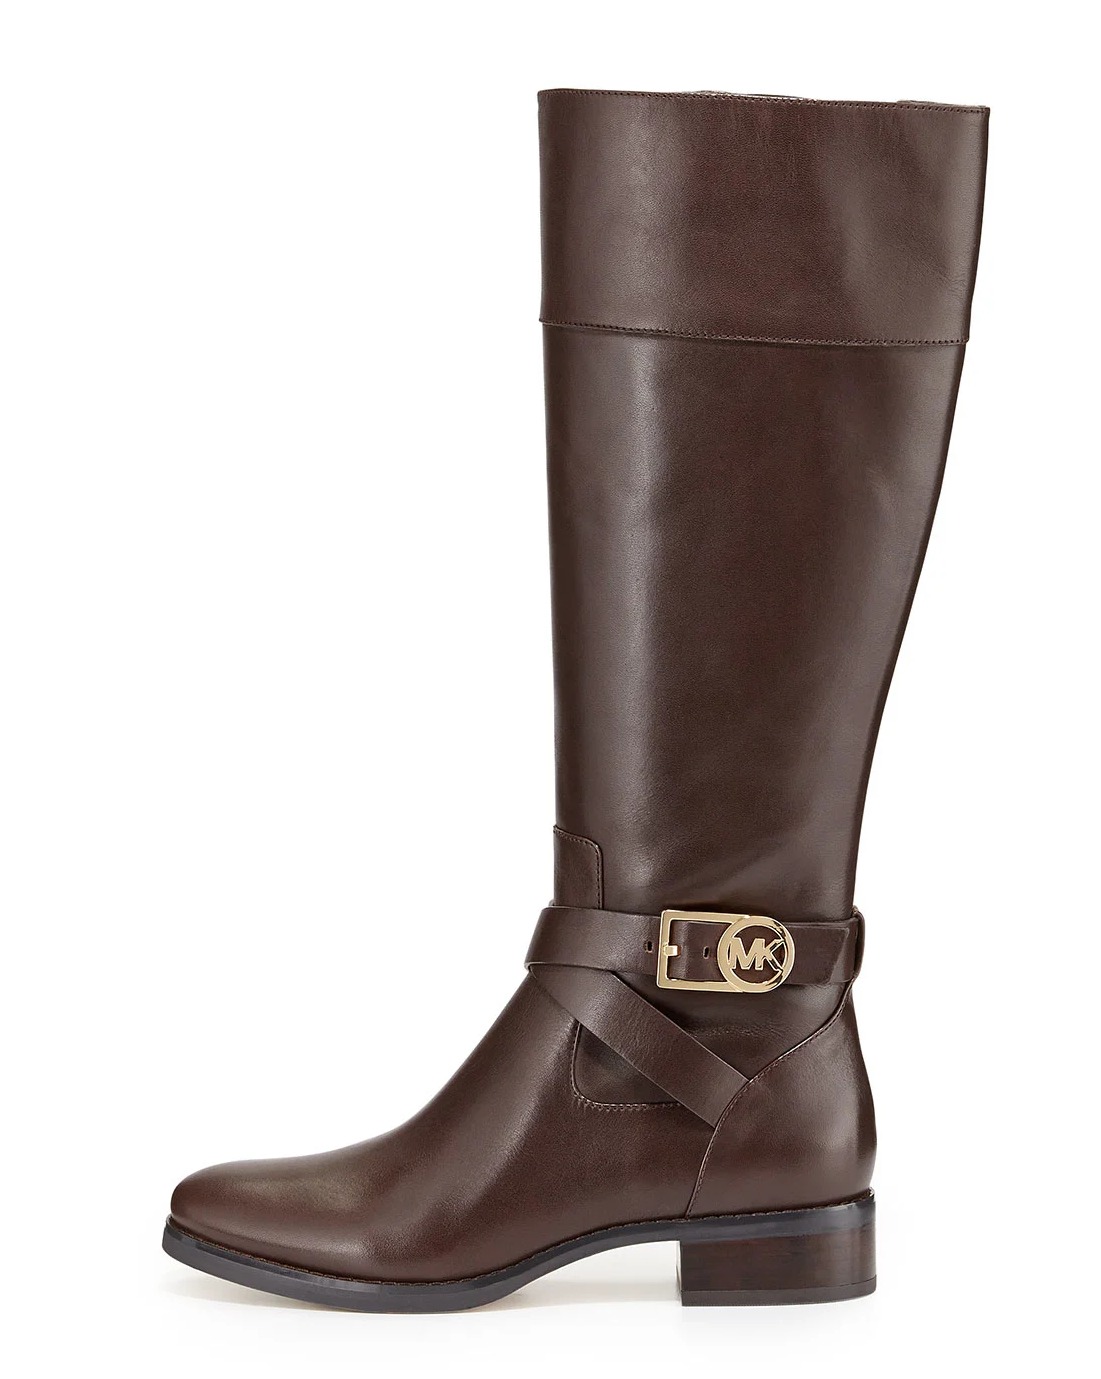 Nice Leather Riding Boot by CreativeT01 on DeviantArt